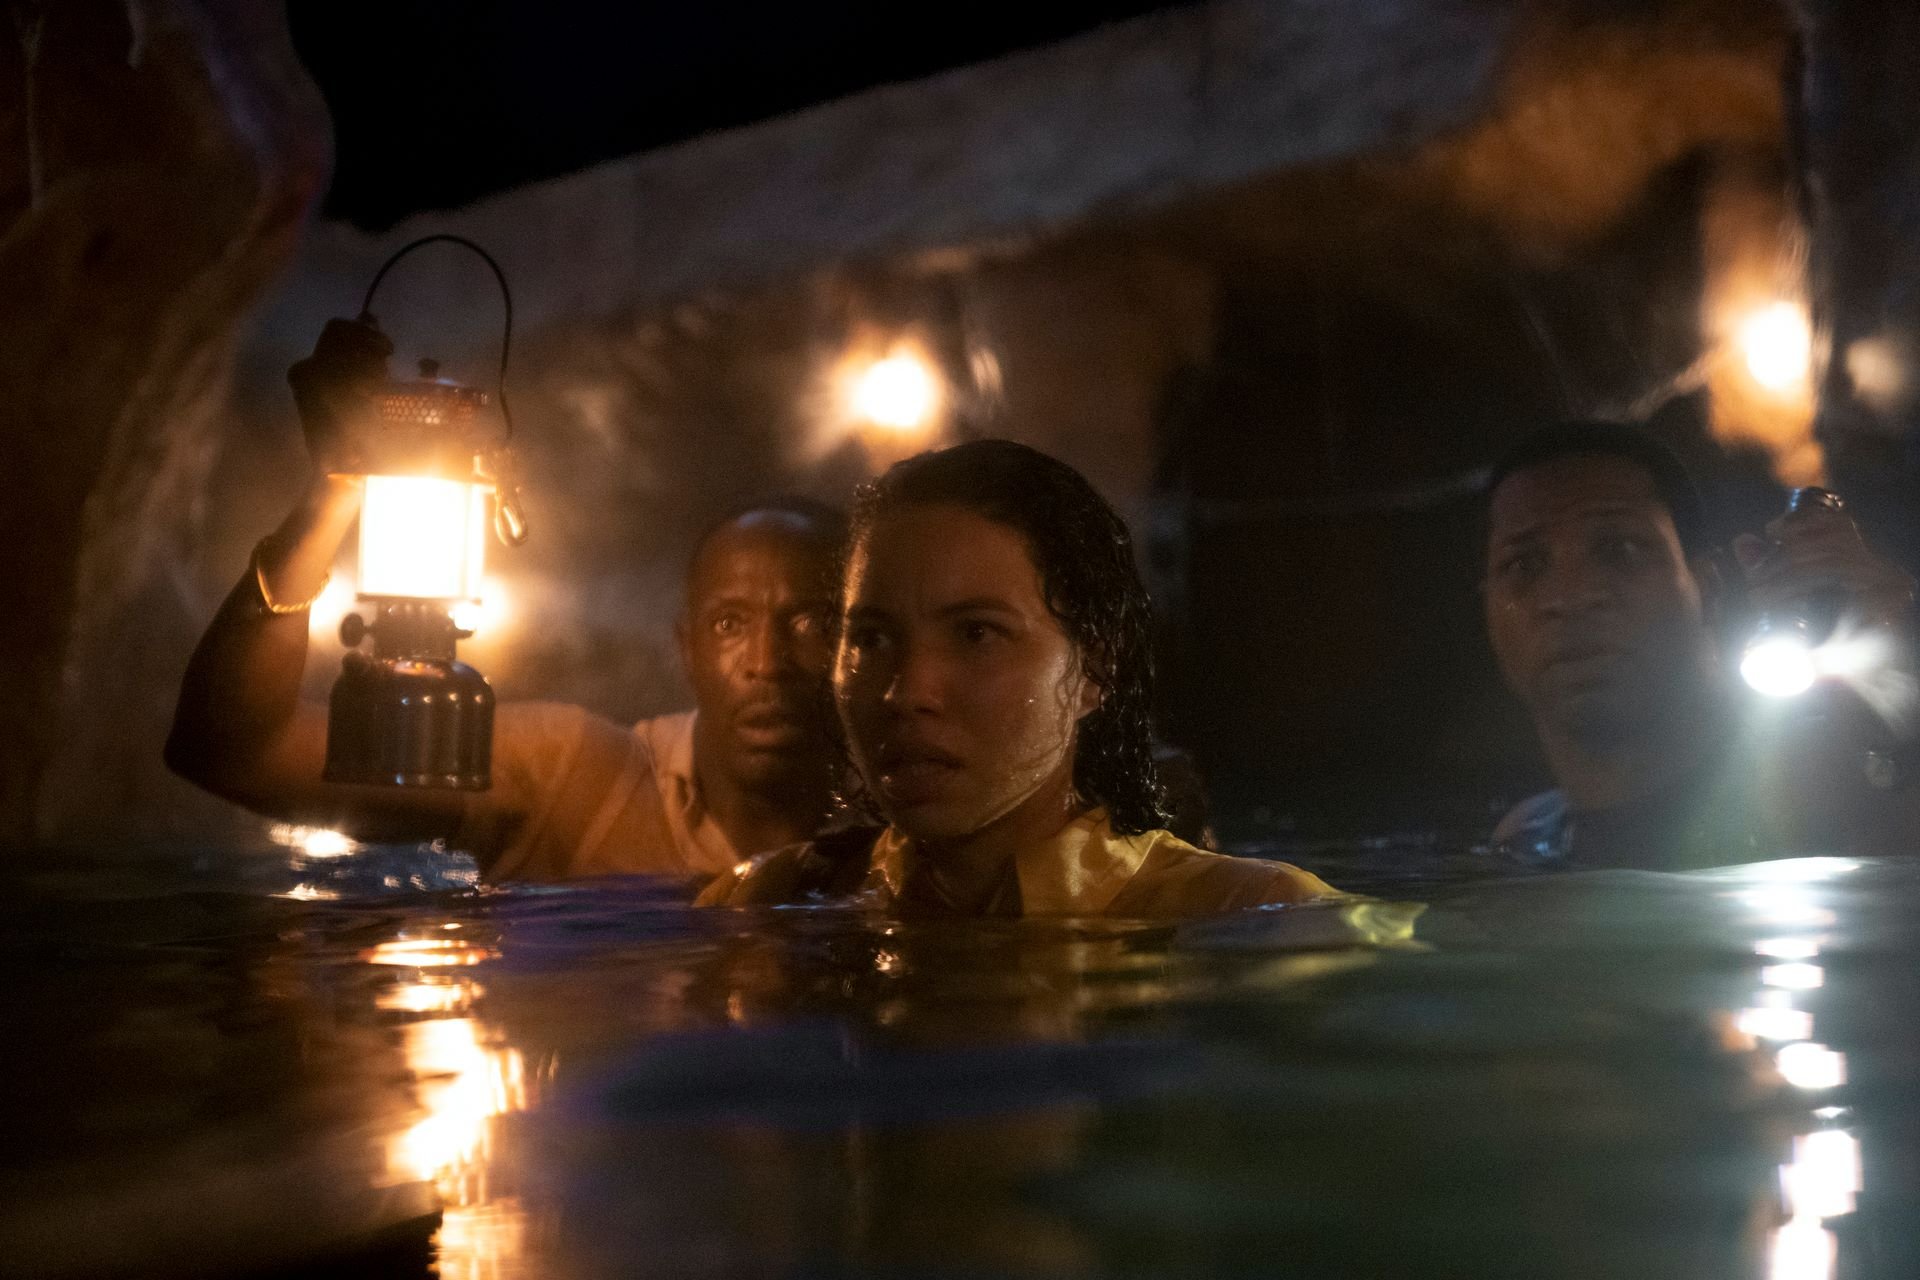 Michael K. Williams, Jurnee Smollet, and Jonathan Majors in 'Lovecraft Country'